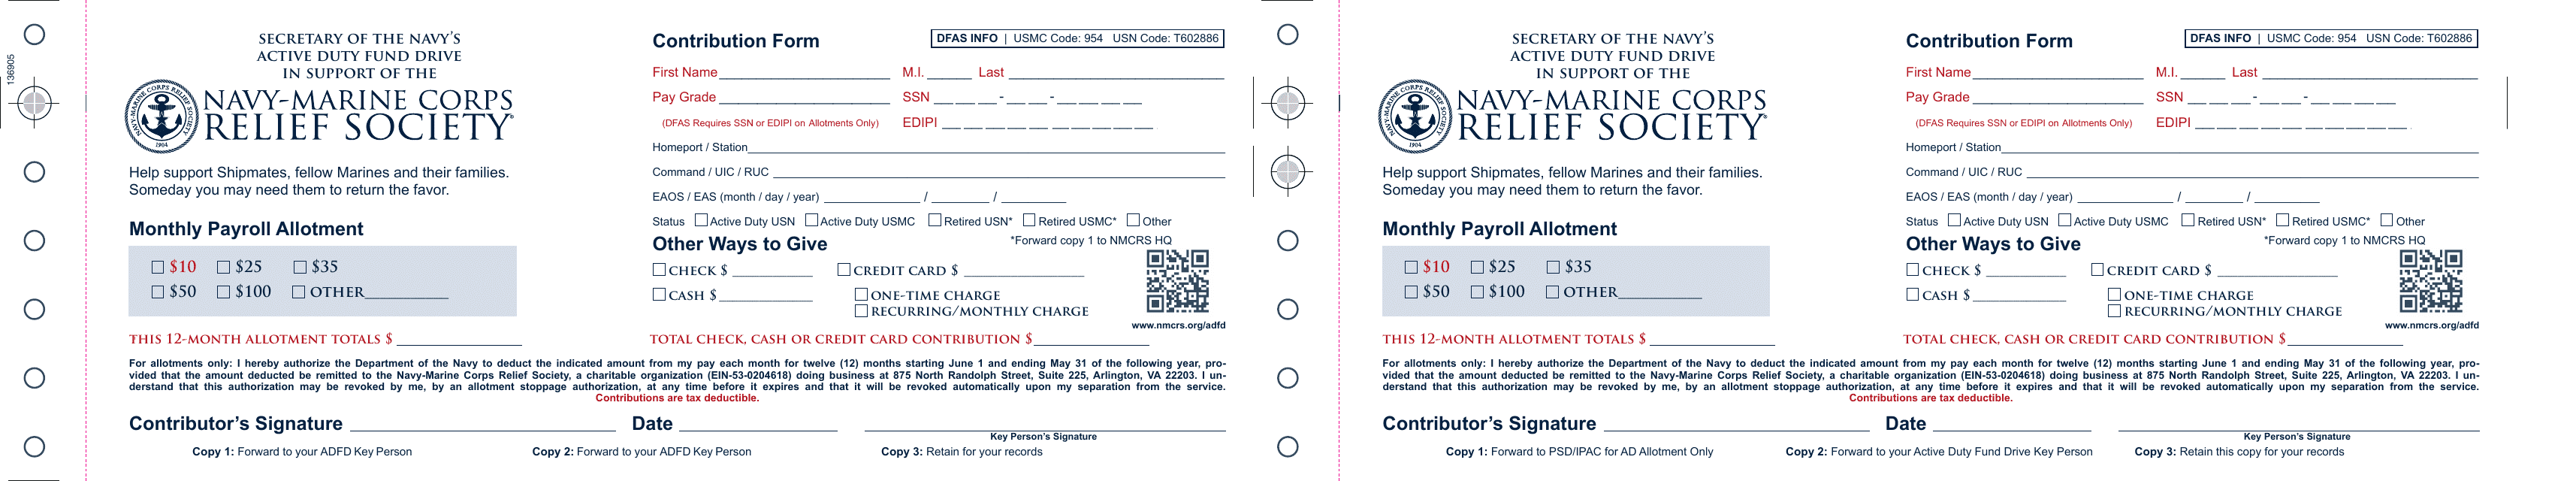 &quot;Contribution Form - the Secretary of the Navy's Active Duty Fund Drive in Support of the Navy-Marine Corps Relief Society&quot; Download Pdf